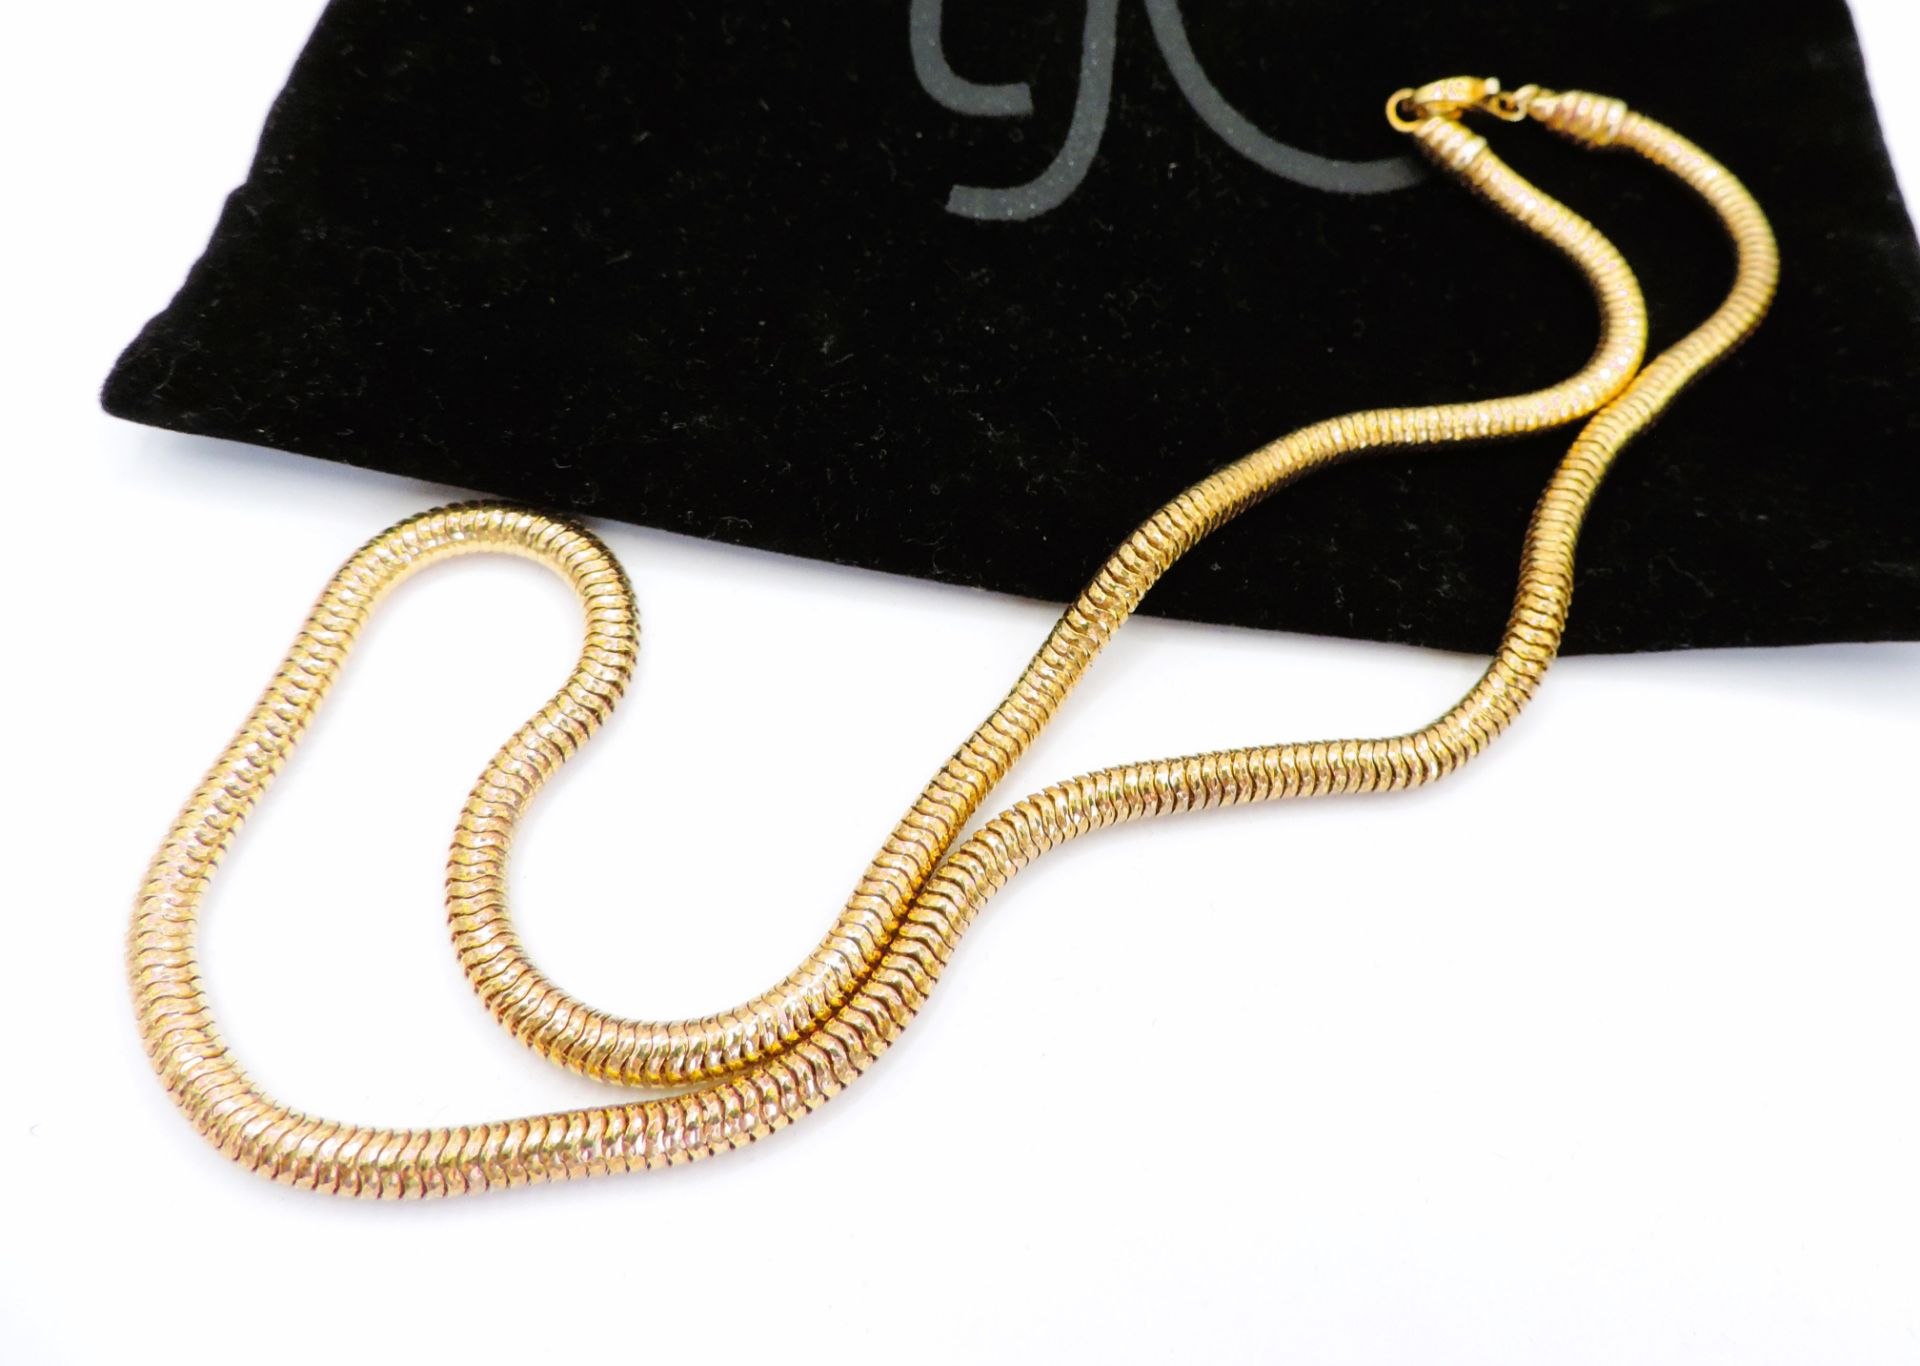 14K Gold on Sterling Silver Chain Necklace Made in Italy 23 grams New with Gift Pouch - Image 4 of 4